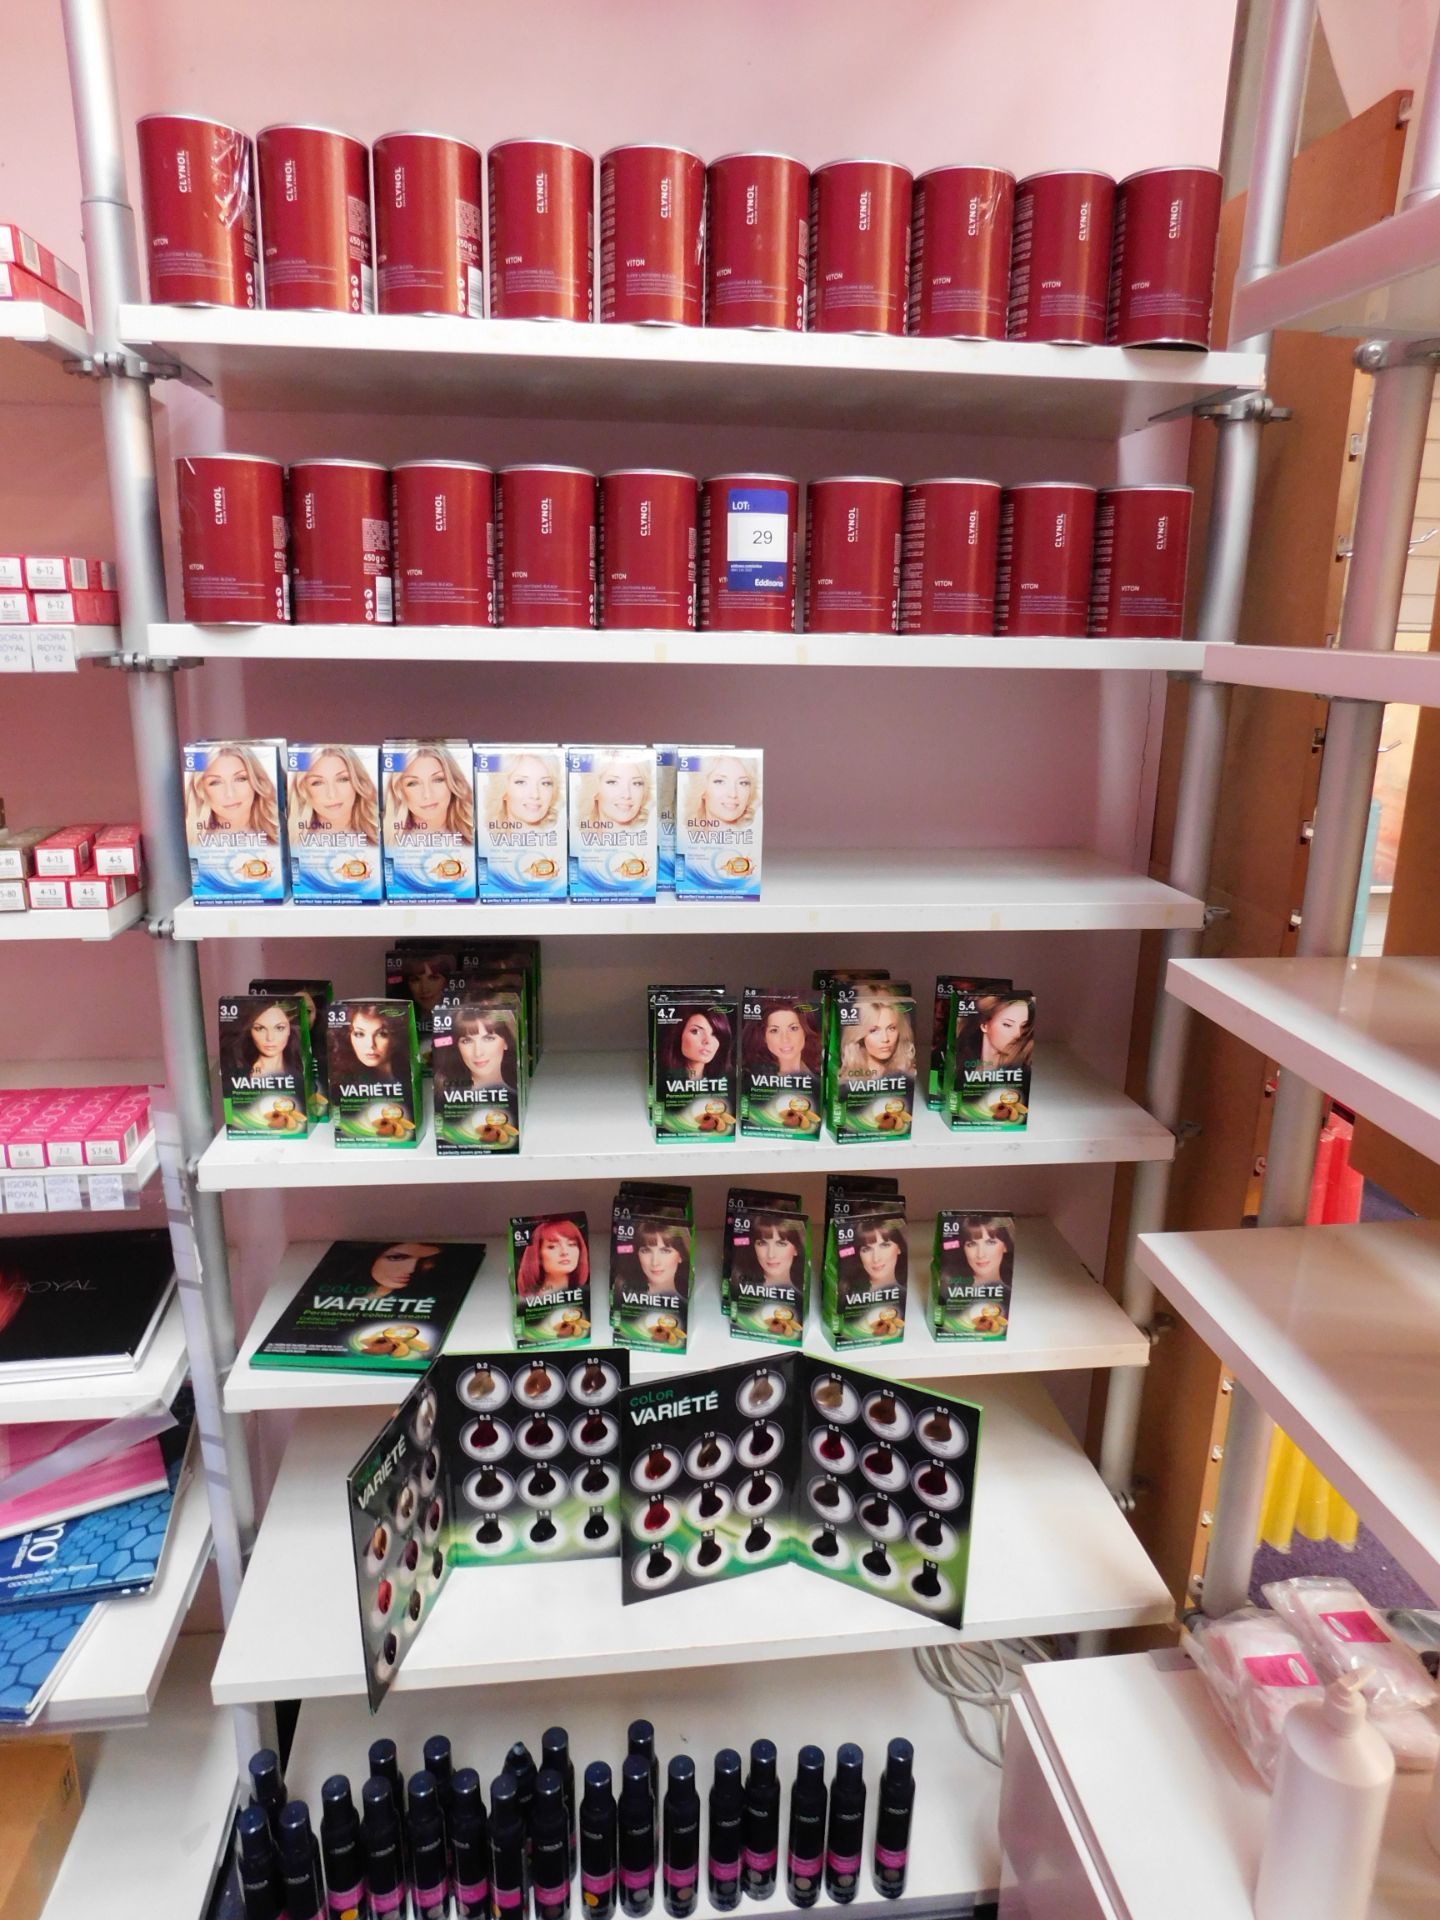 Contents to 1 bay of shop display shelving, to include an assortment of hair colour products